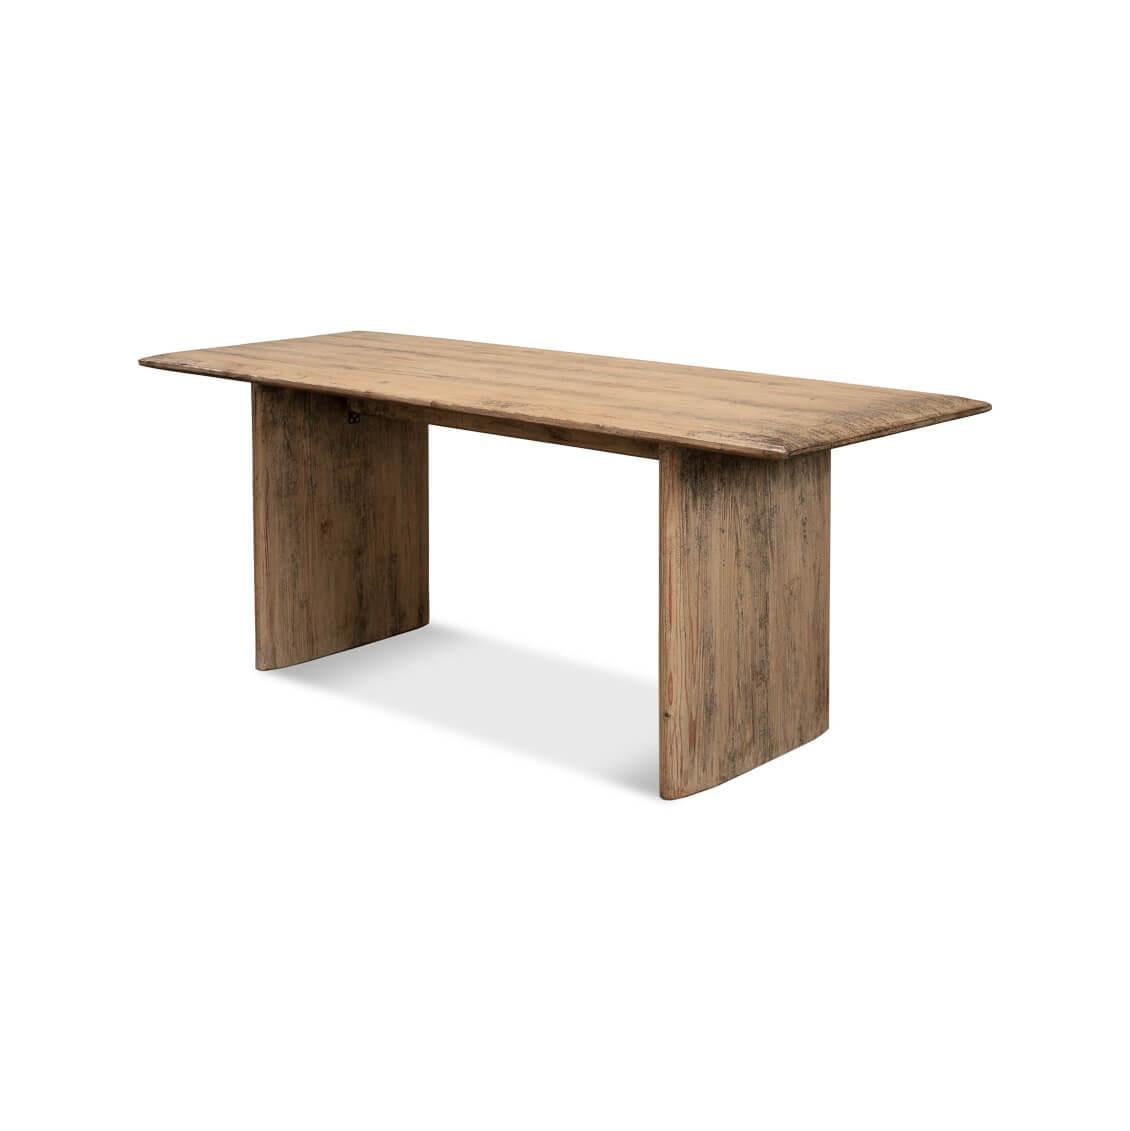 Minimalist Reclaimed Pine Dining Table For Sale